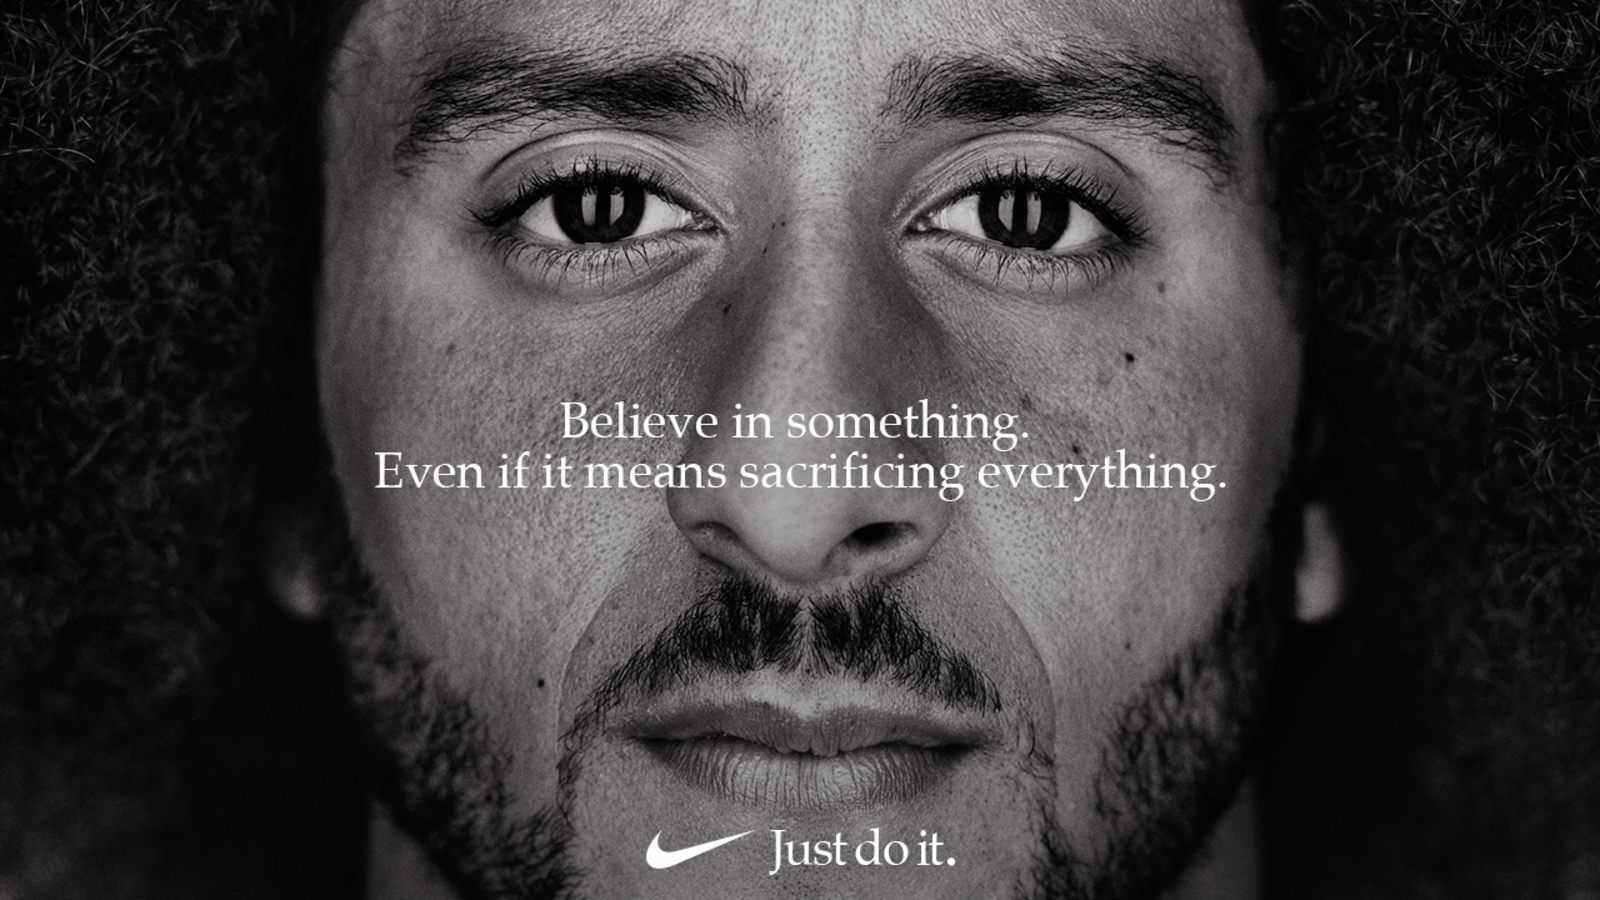 Image source: Nike's 2018 'Just do it' campaign.